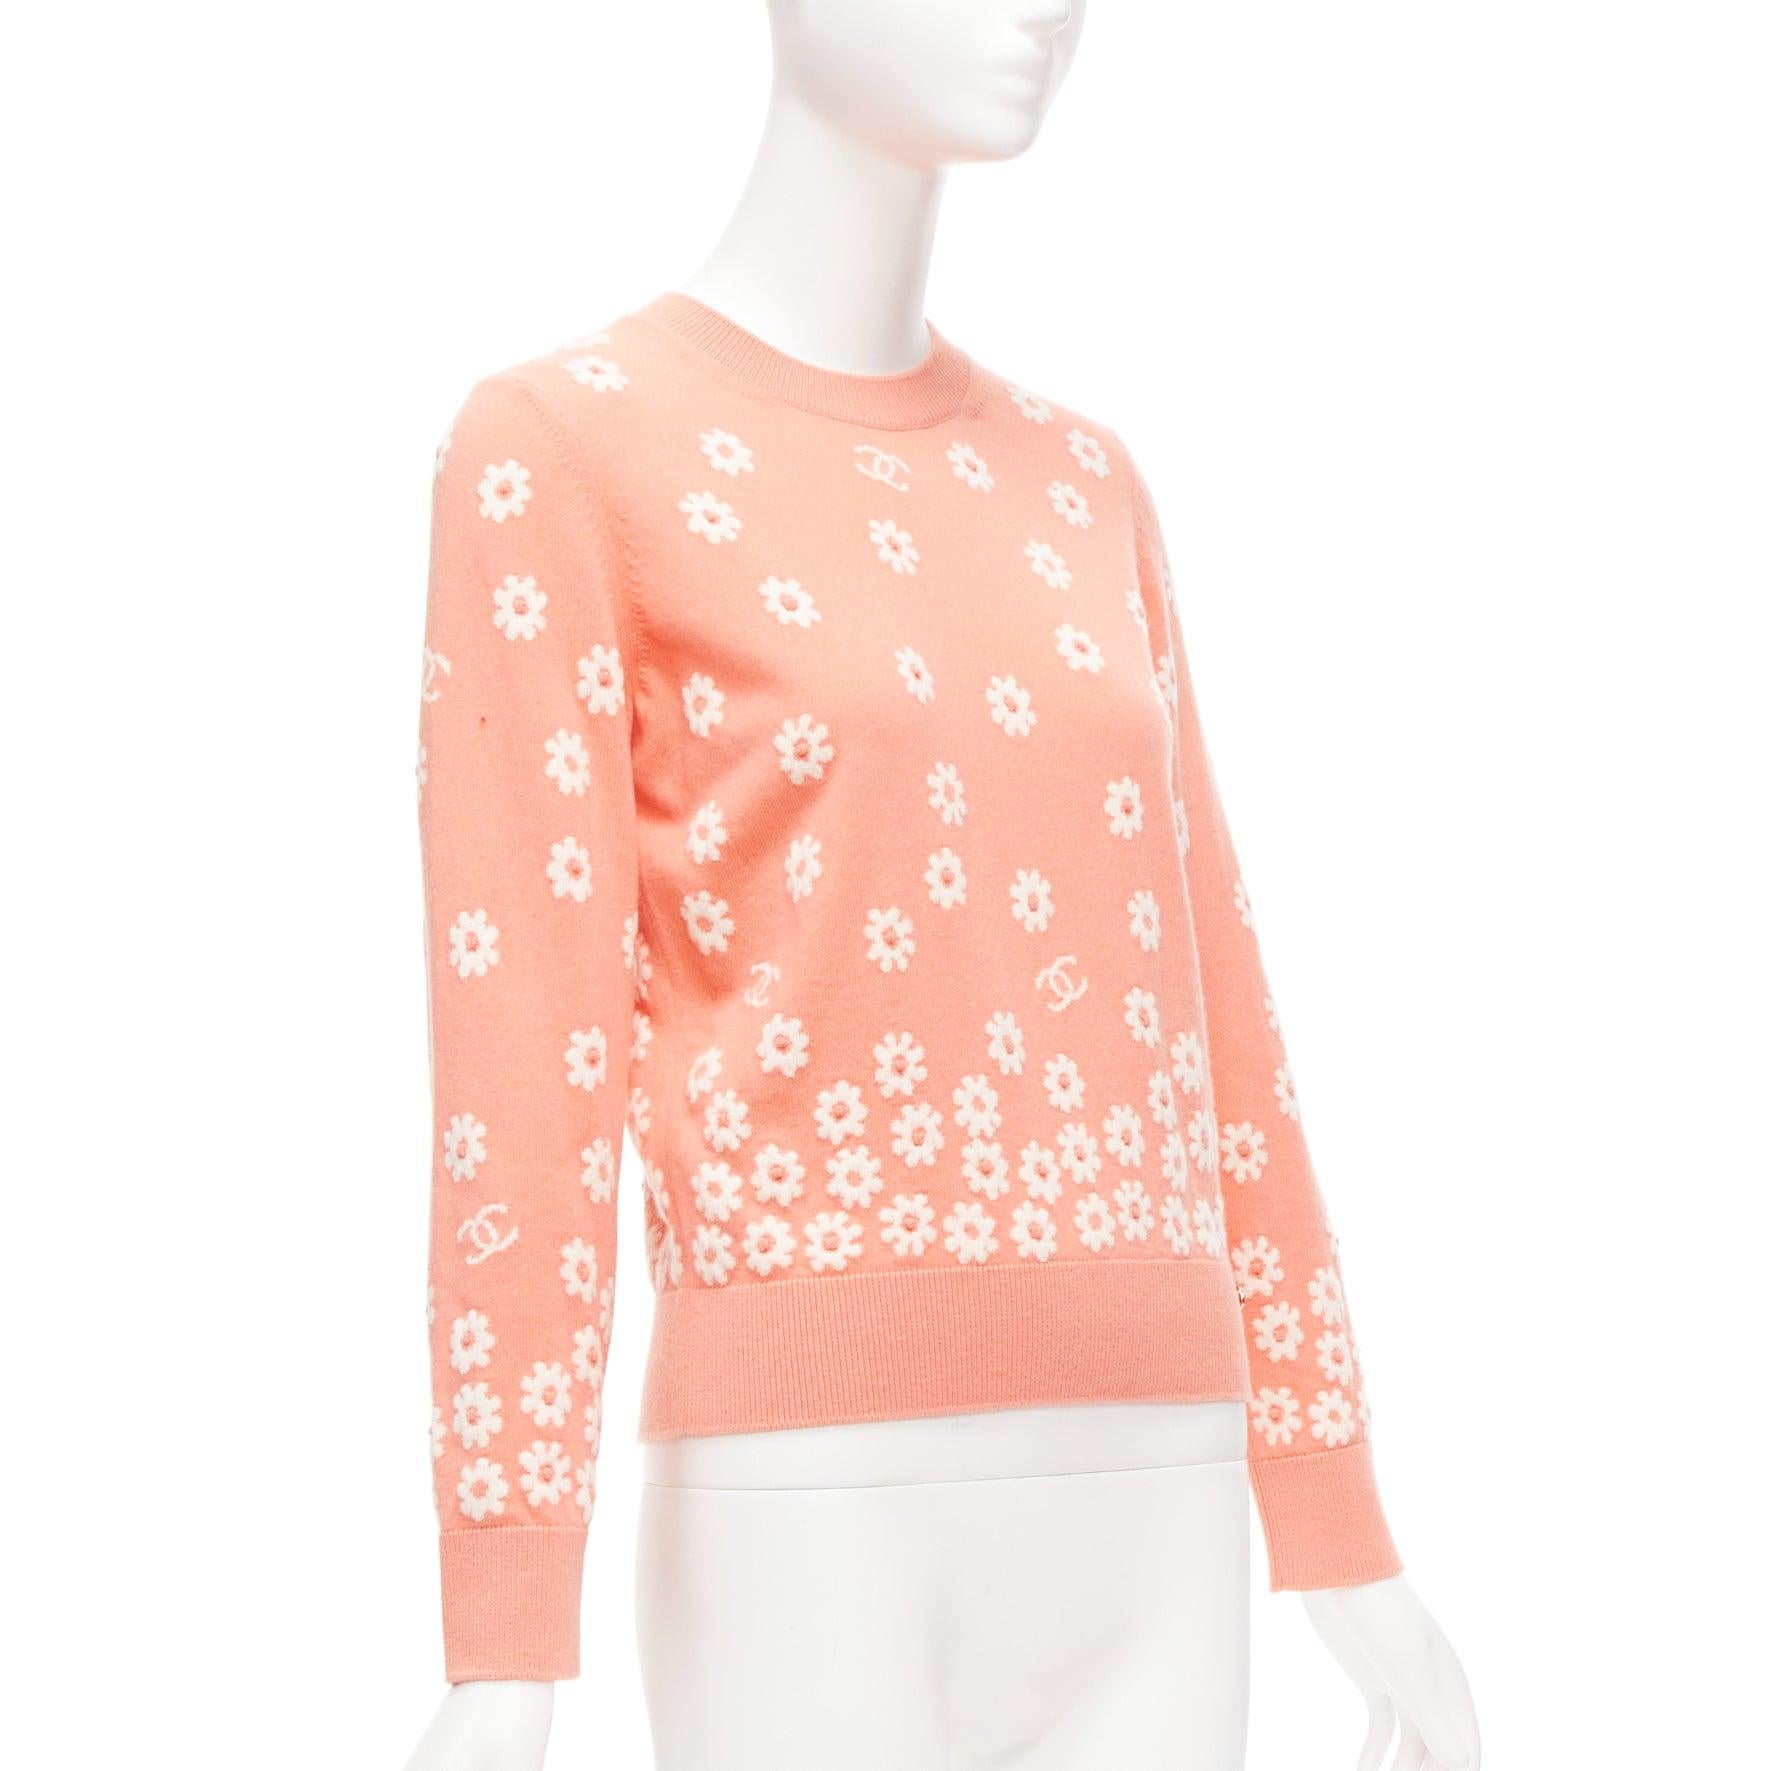 CHANEL 22P peach cashmere blend floral CC knitted pullover sweater FR34
Reference: AAWC/A00661
Brand: Chanel
Designer: Virginie Viard
Collection: 22P
Material: Cashmere, Blend
Color: Peach
Pattern: Floral
Extra Details: Crew neck. CC and floral